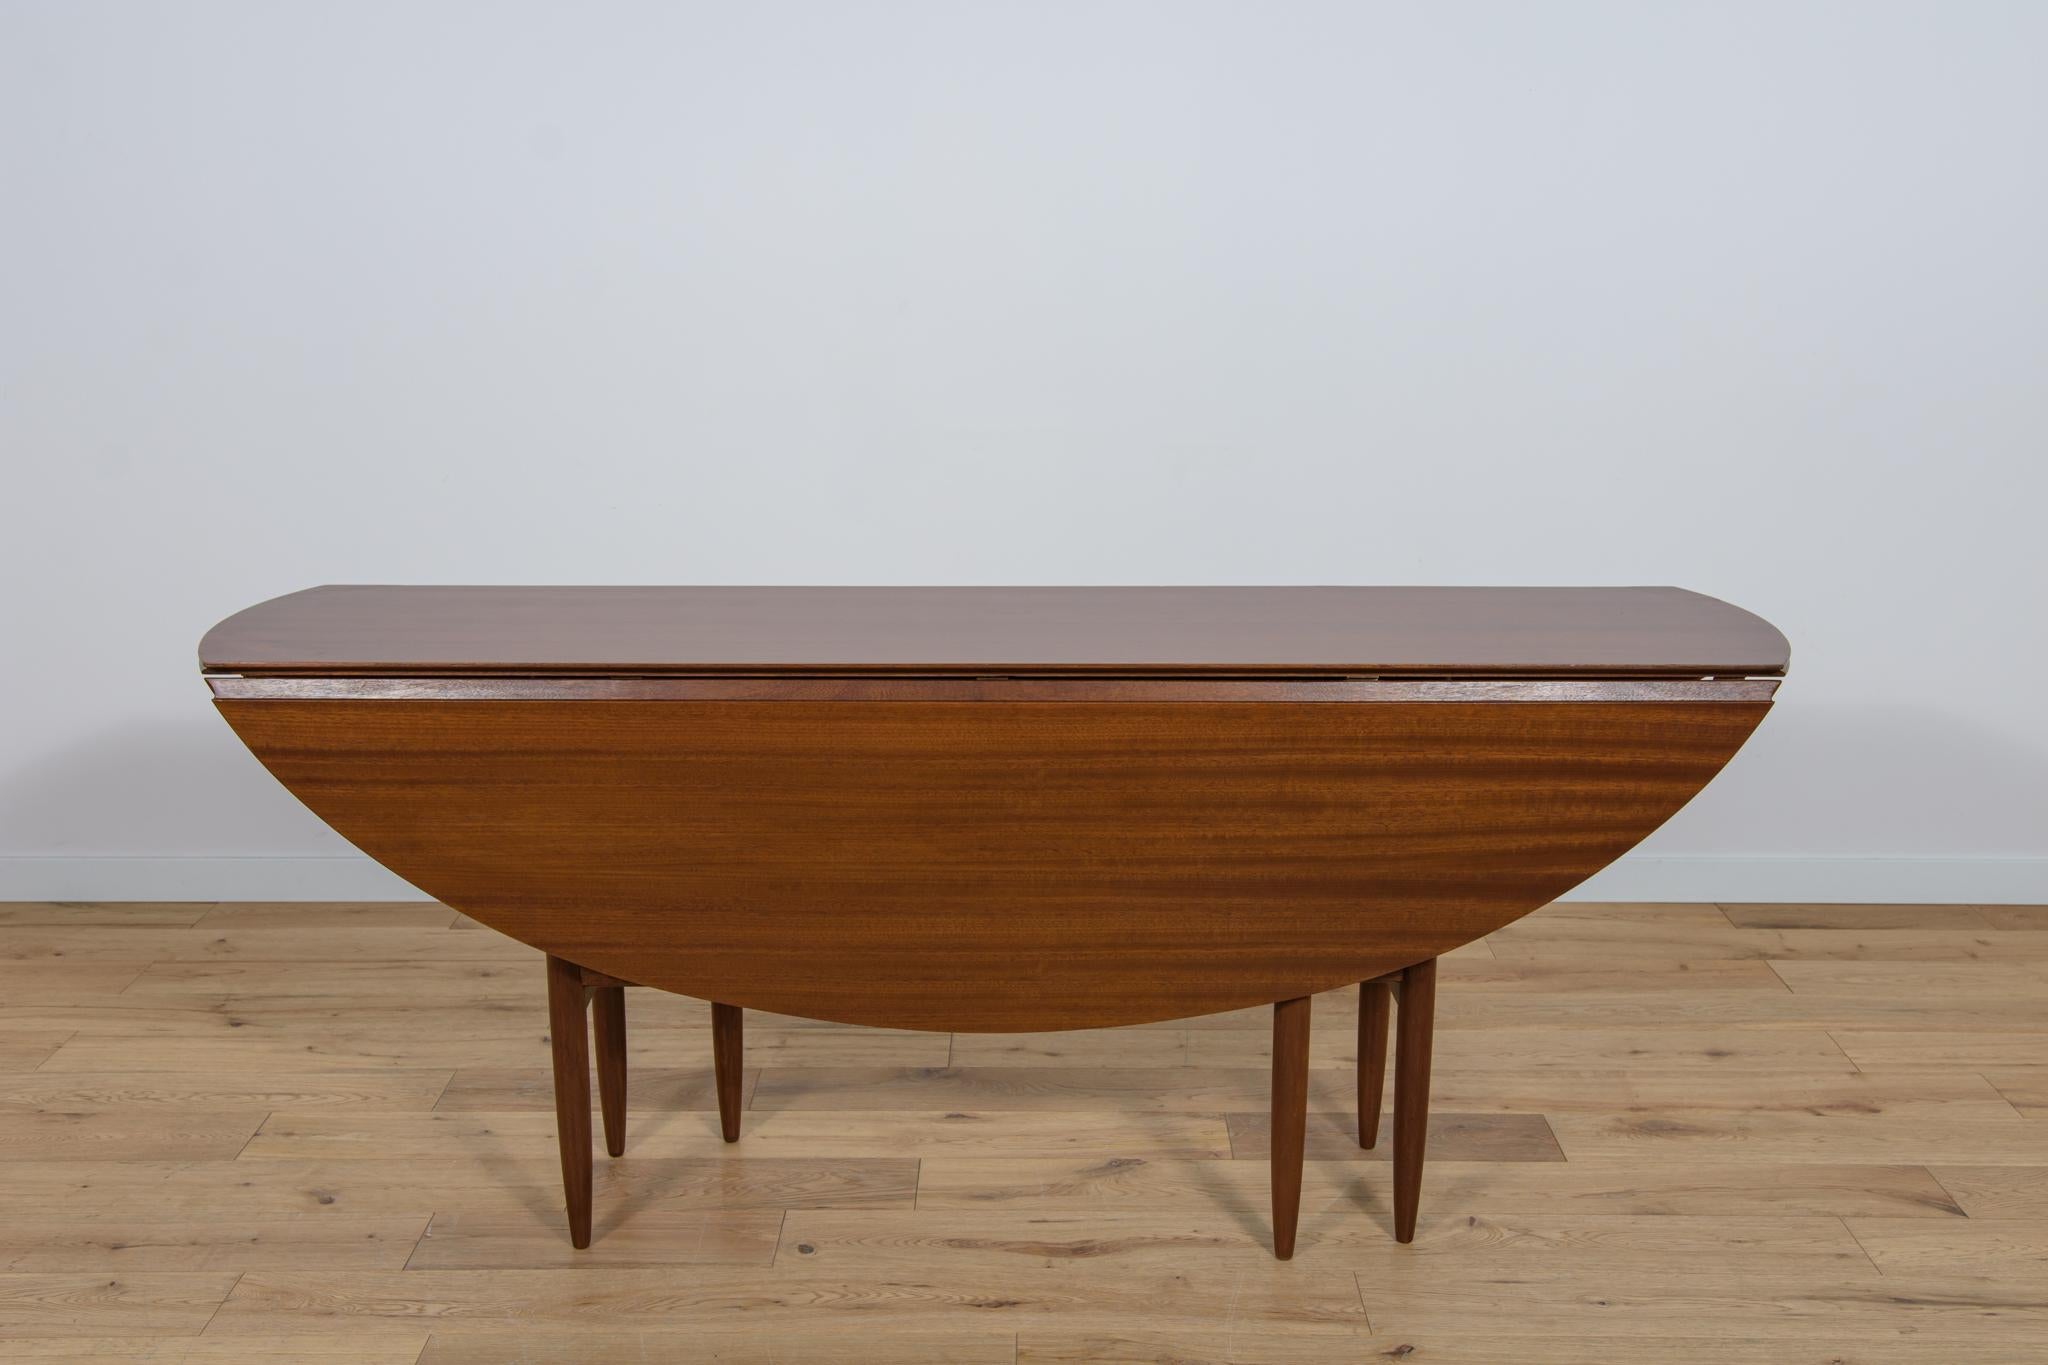 Extendable table, manufactured in Great Britain in the 1960s. The entire piece has undergone a comprehensive carpentry renovation. The set is made of mahogany wood. The wooden elements were cleaned of the old coating, veneer defects filled, painted